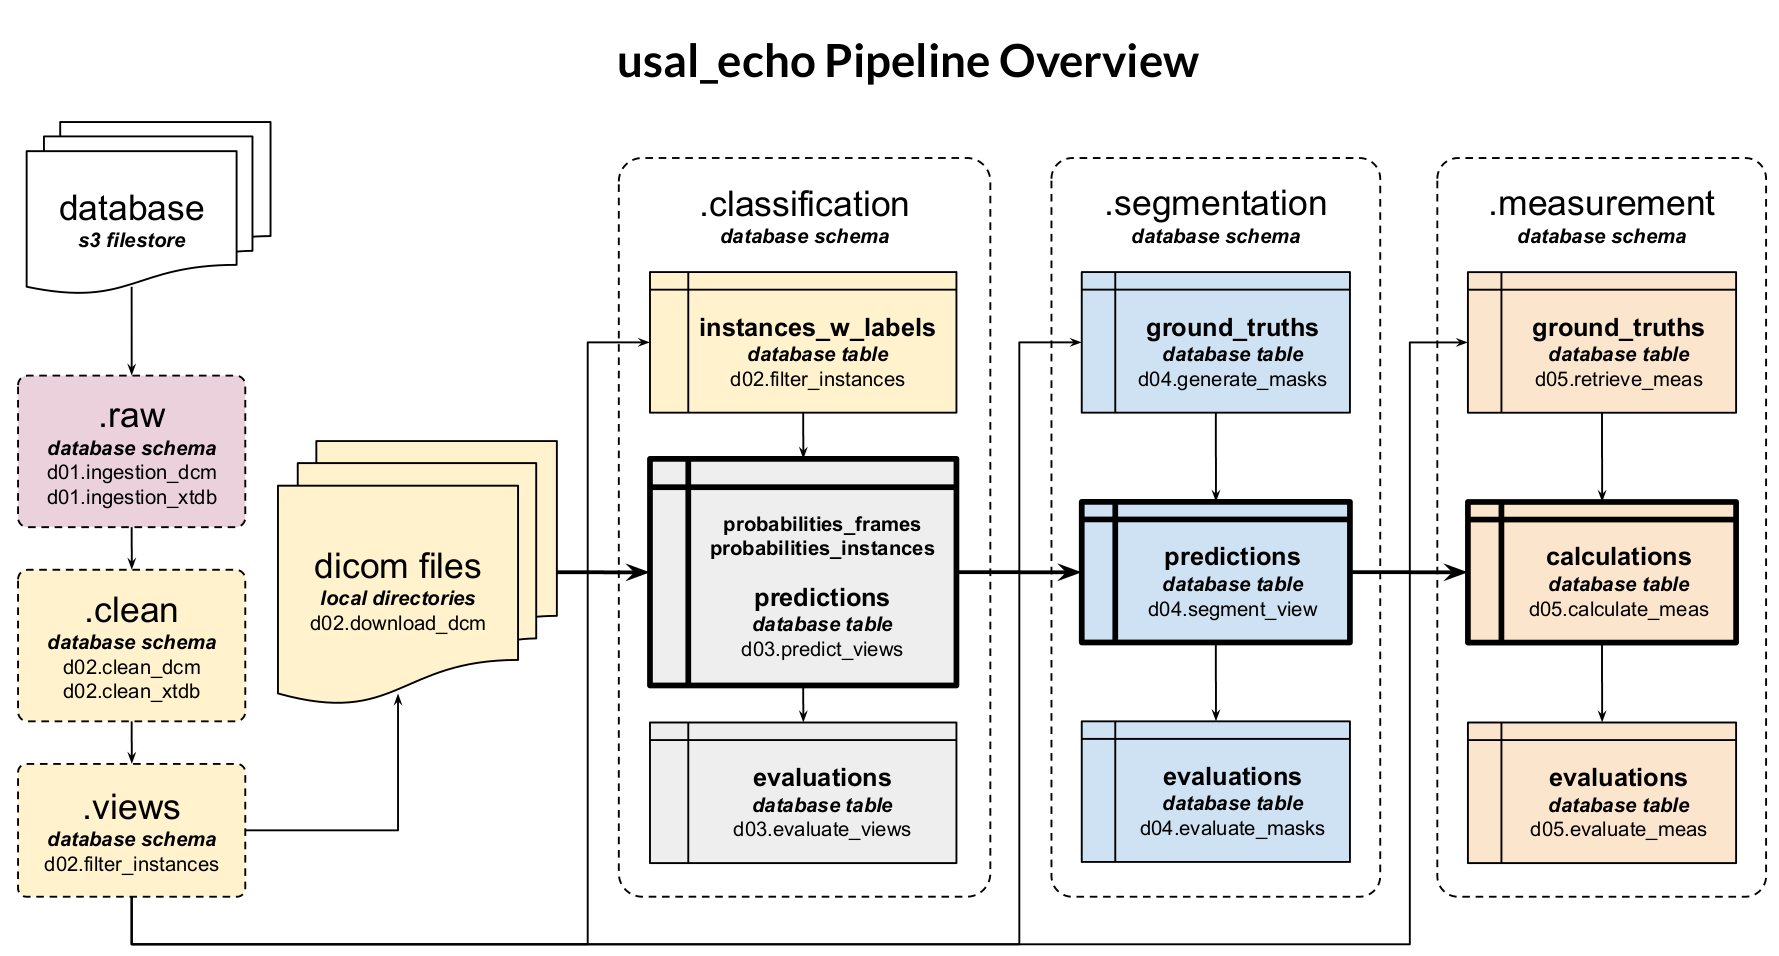 USAL Echo Project Overview